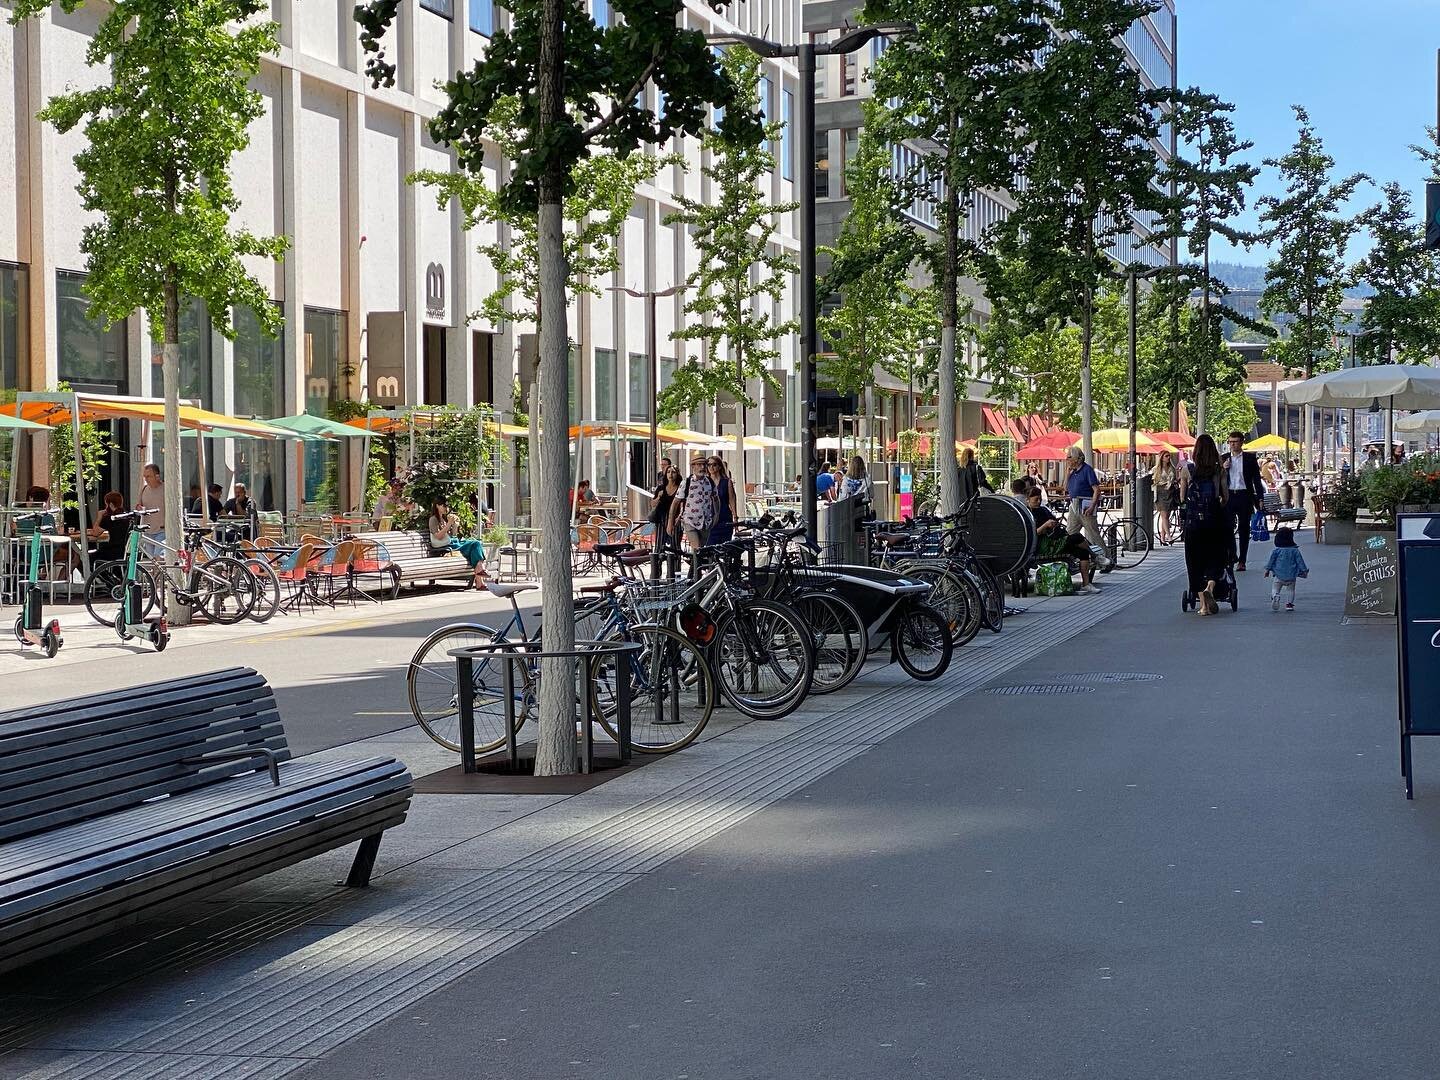 As seen on a Zurich street

A single zone for all street trees, furniture, and bike parking
At least 30 feet each side for outdoor dining 
About 15 feet for service and private vehicles
This is a new street in Europaallee district